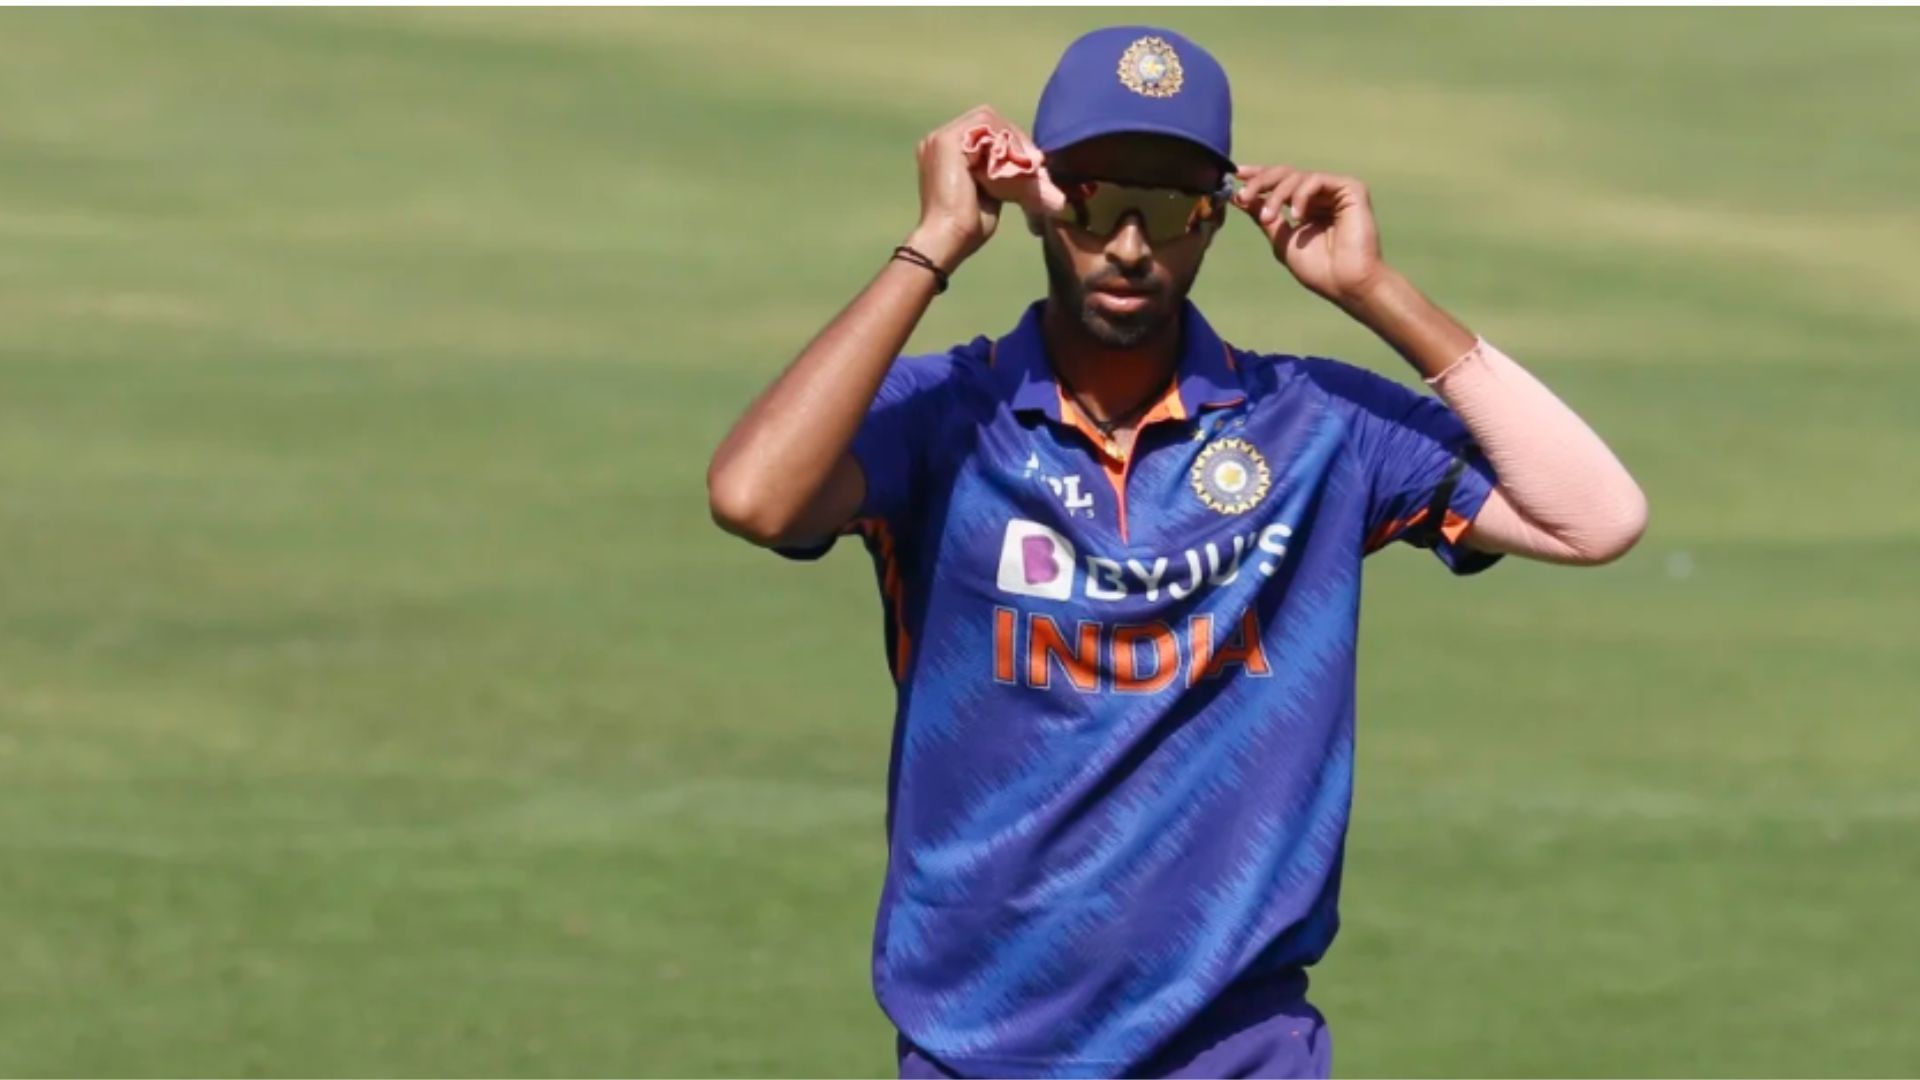 Washington Sundar narrowly missed out on a World Cup berth (Pic: BCCI)